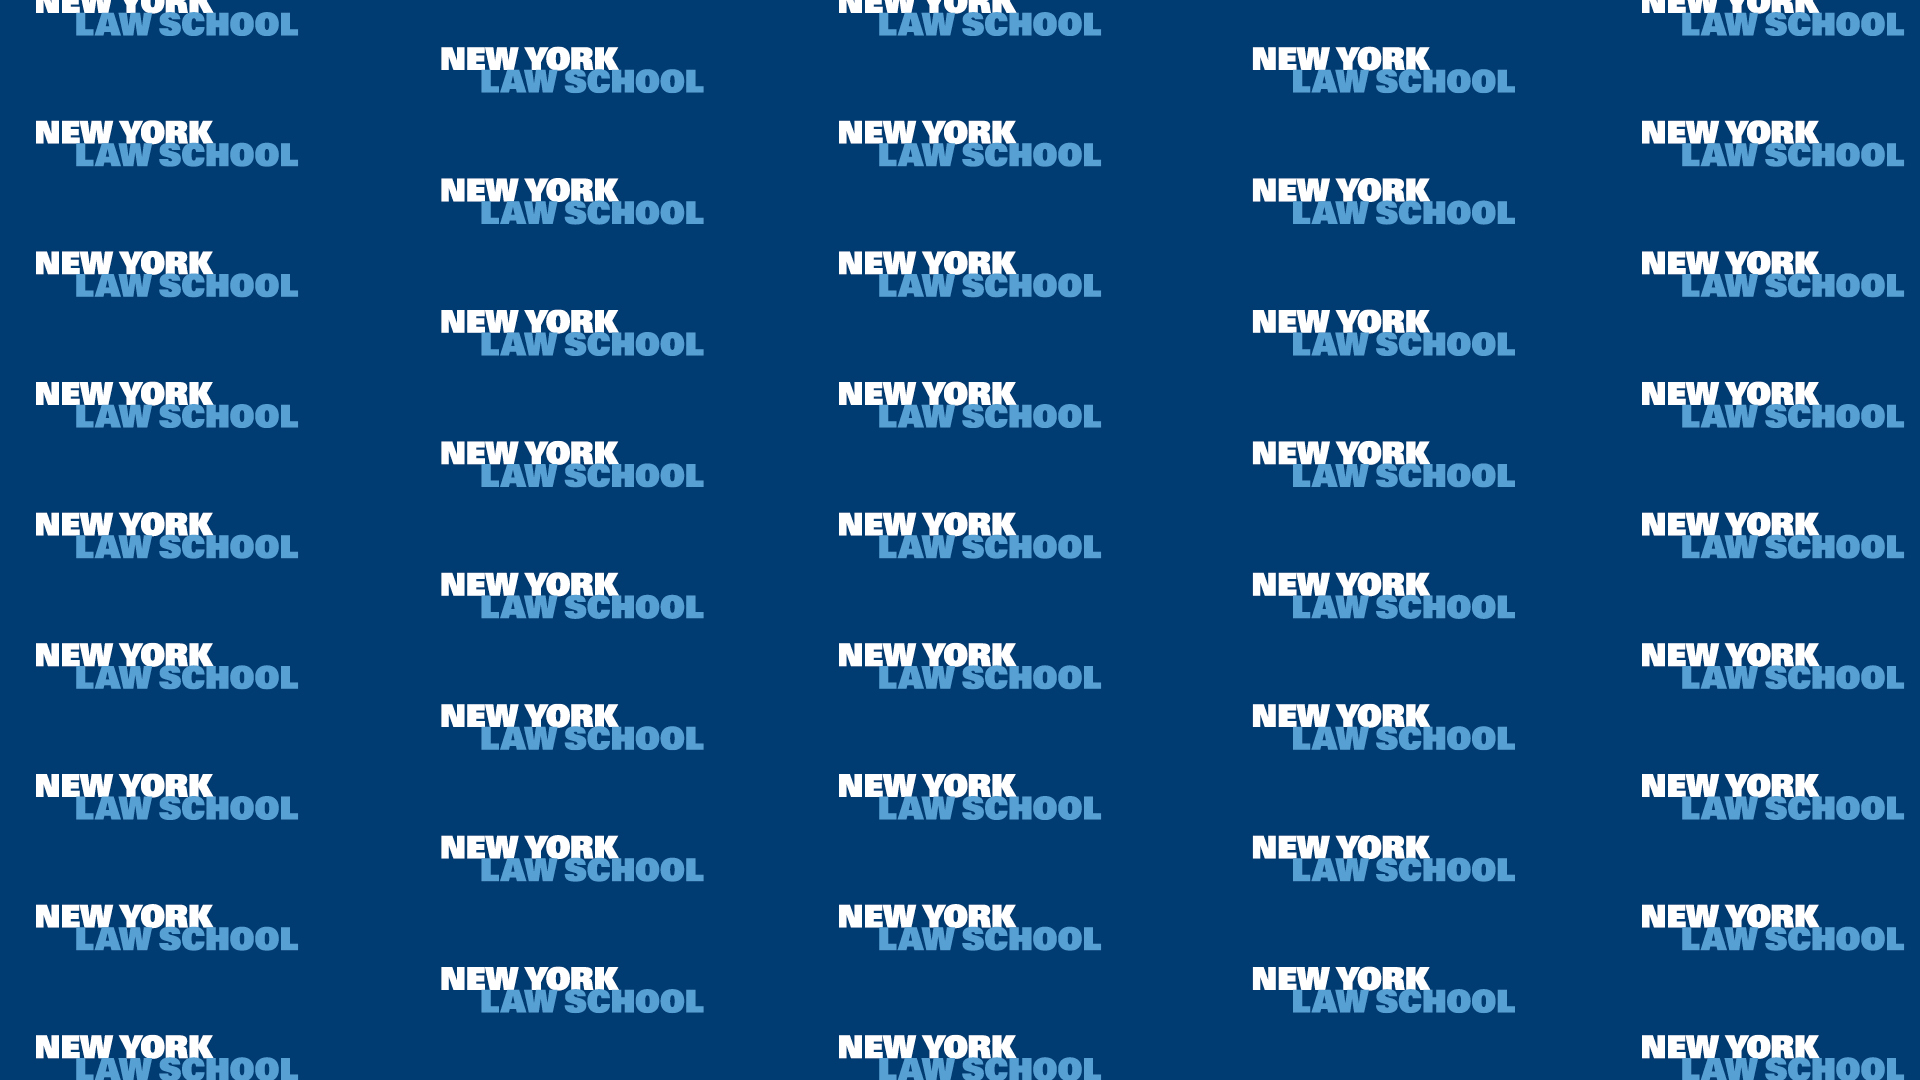 New York Law School step and repeat